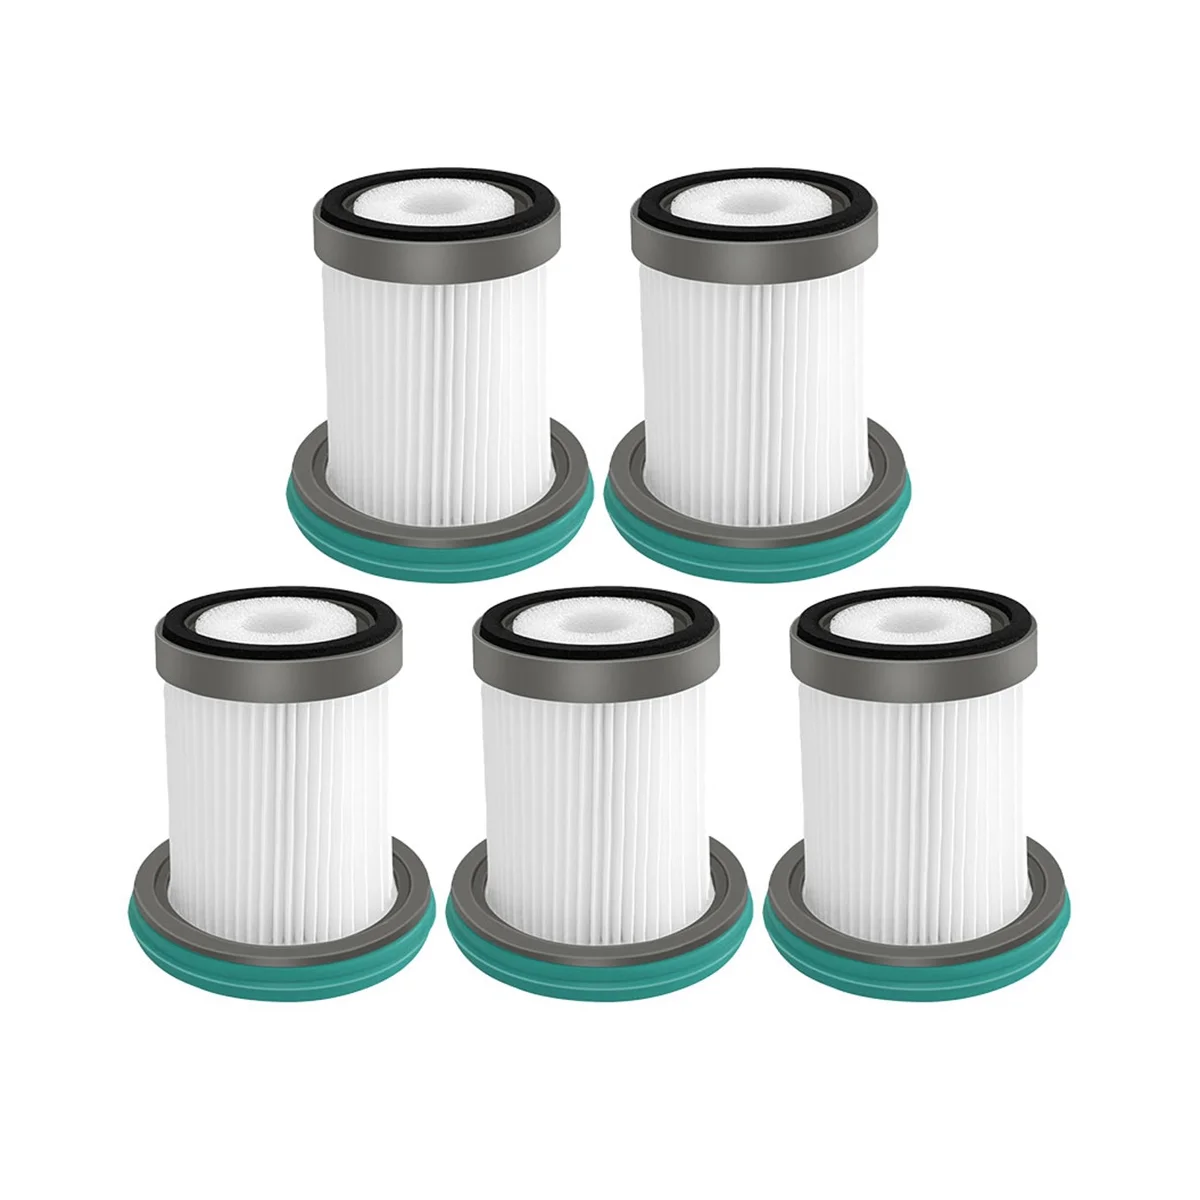 

5PCS for Puppyoo Cyclone Cordless Vacuum Cleaner Home Handheld Stick T11 / T11 Pro Washable Hepa Filter Set Parts